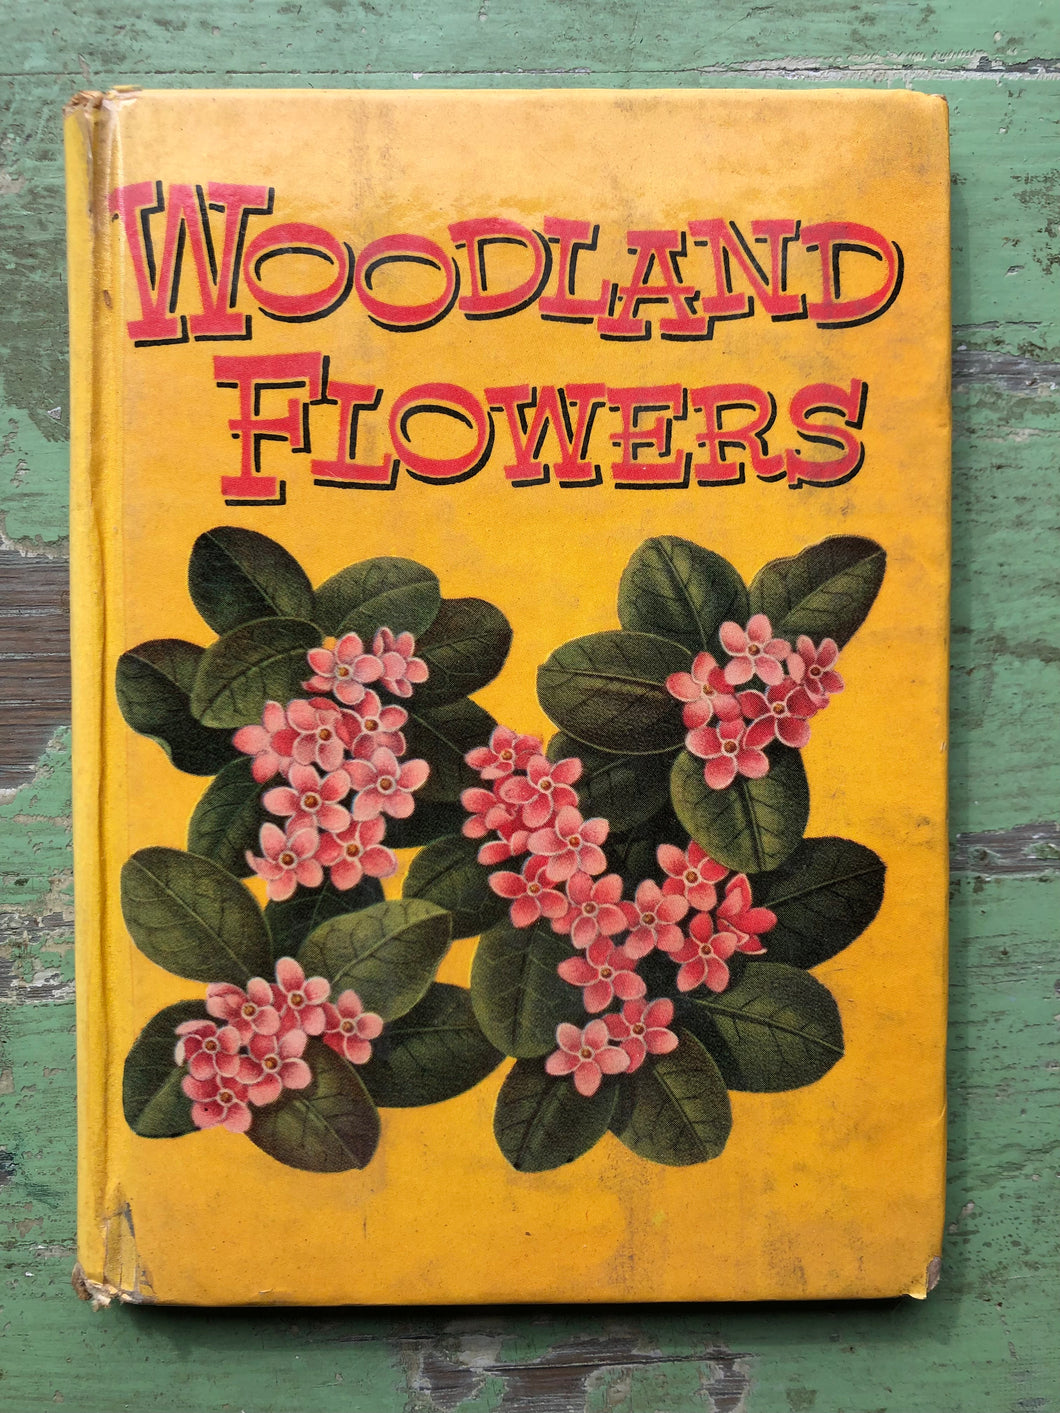 Woodland Flowers. by T. H. Everett